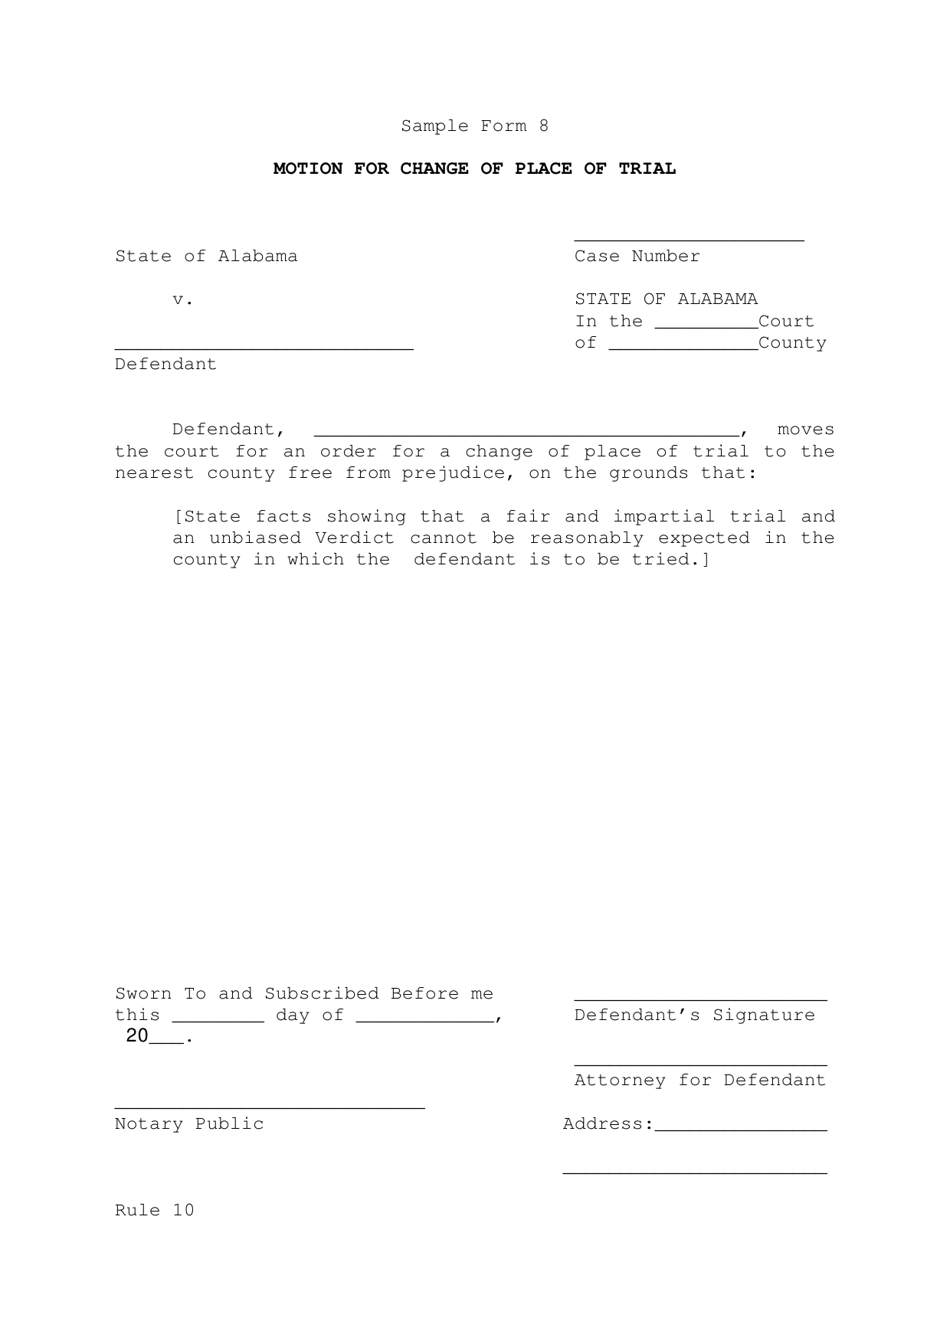 Sample Form 8 Motion for Change of Place of Trial - Alabama, Page 1